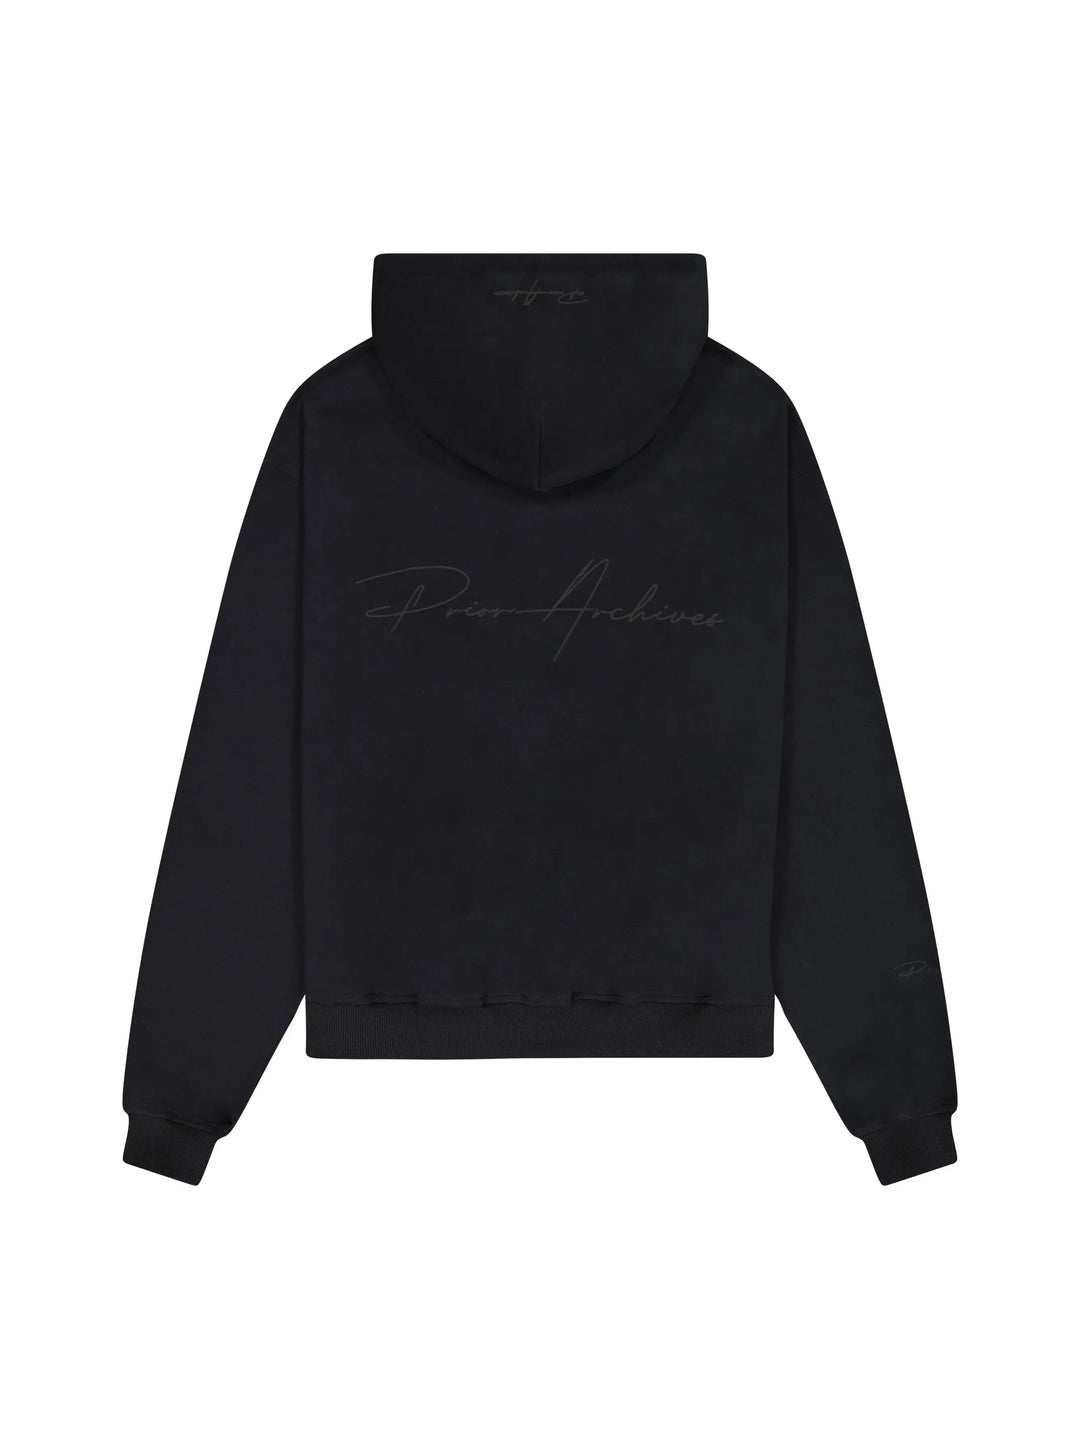 Prior Black Collection Embroidery Logo Oversized Hoodie Onyx in Auckland, New Zealand - Shop name